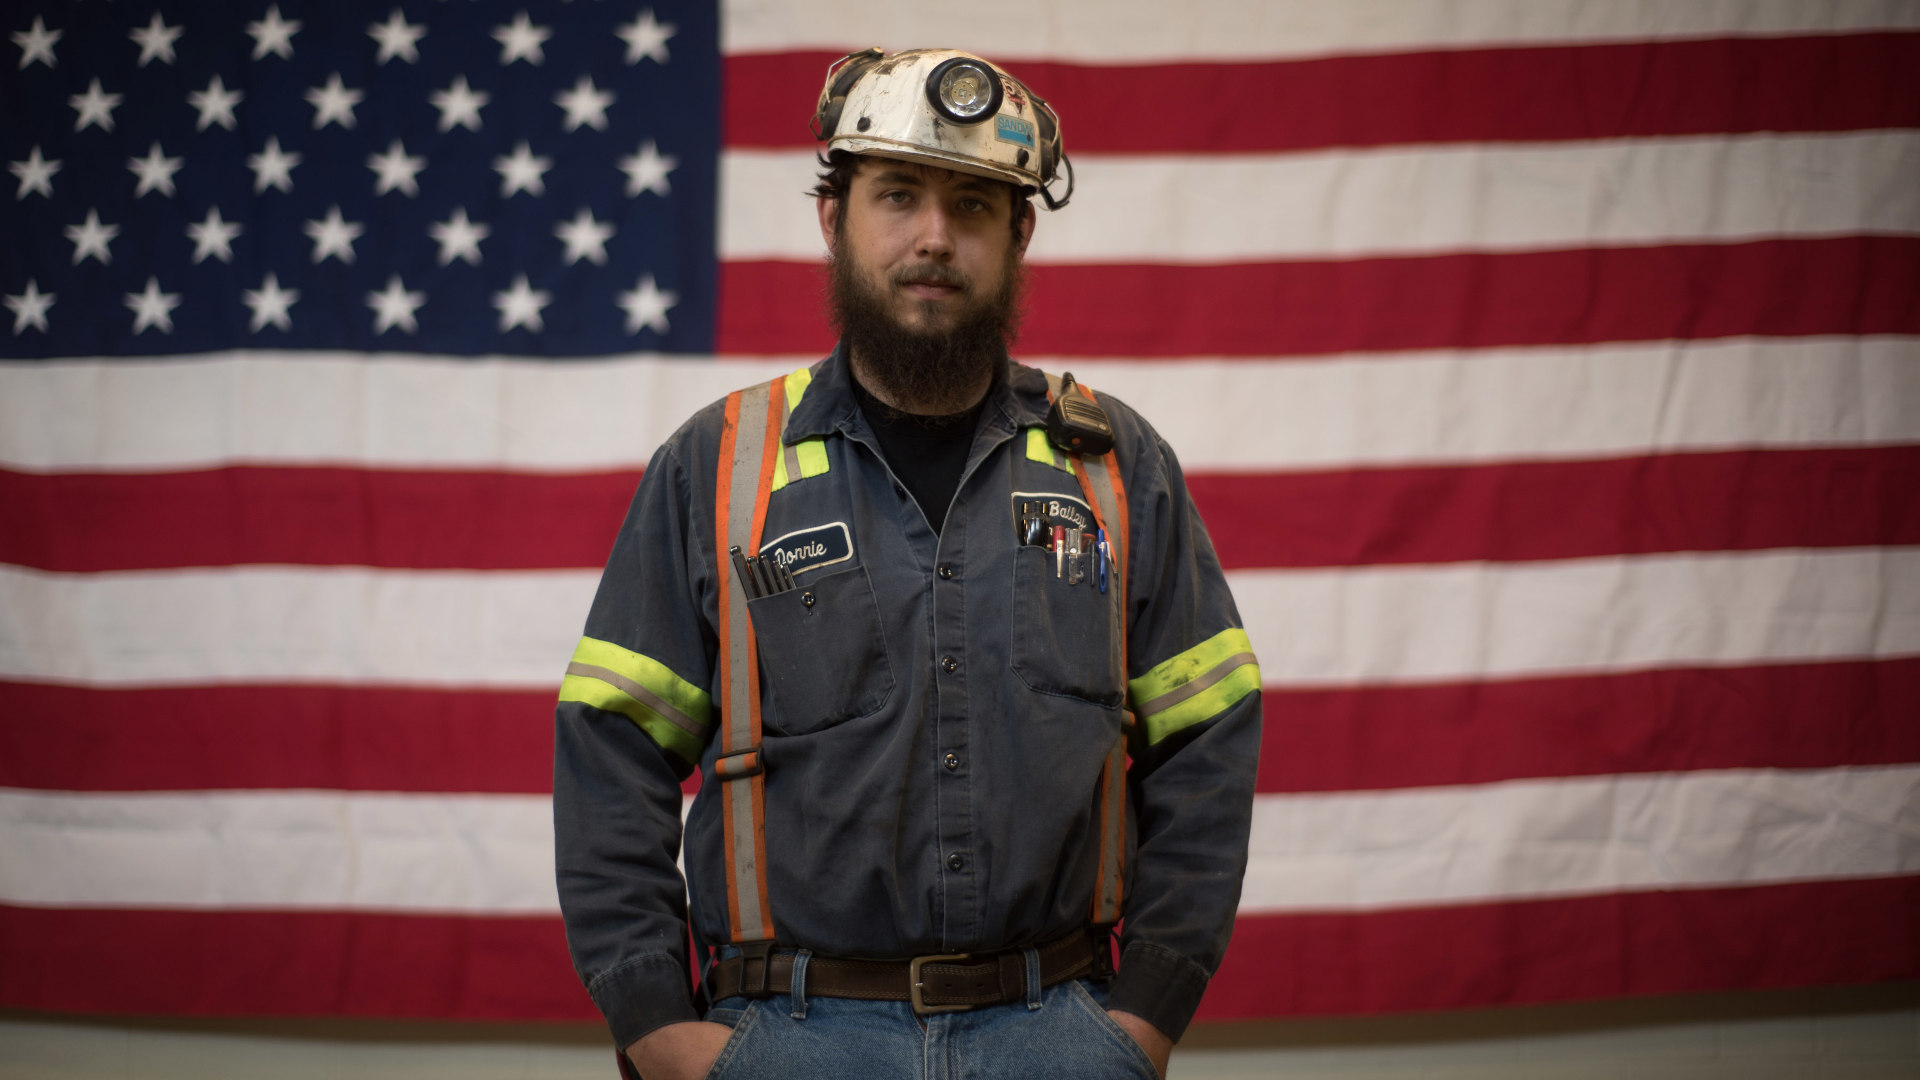 A miner from West Virginia stands in front of an American flag prior to an event with former U.S. EPA Administrator Scott Pruitt at the Harvey Mine in Pennsylvania on April 13, 2017.